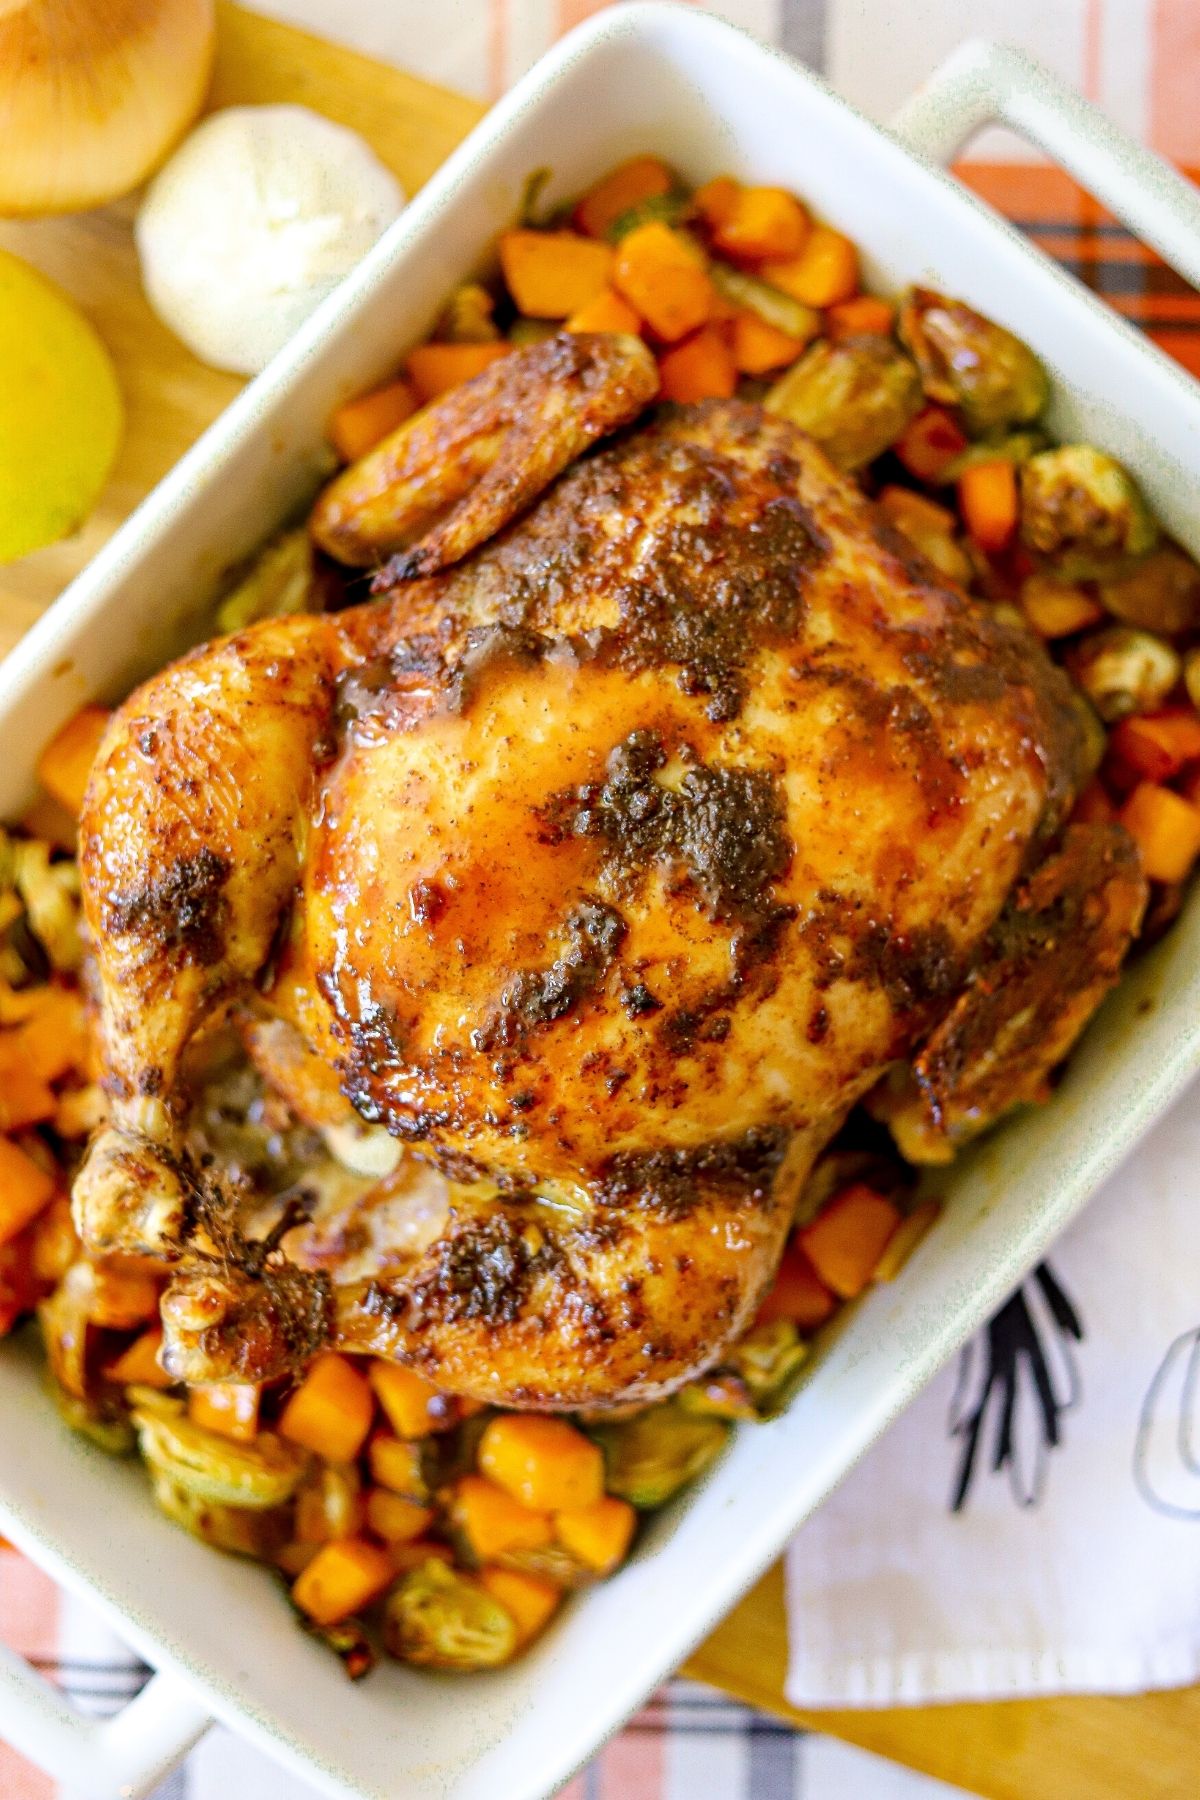 A whole roasted chicken over vegetables in a baking dish